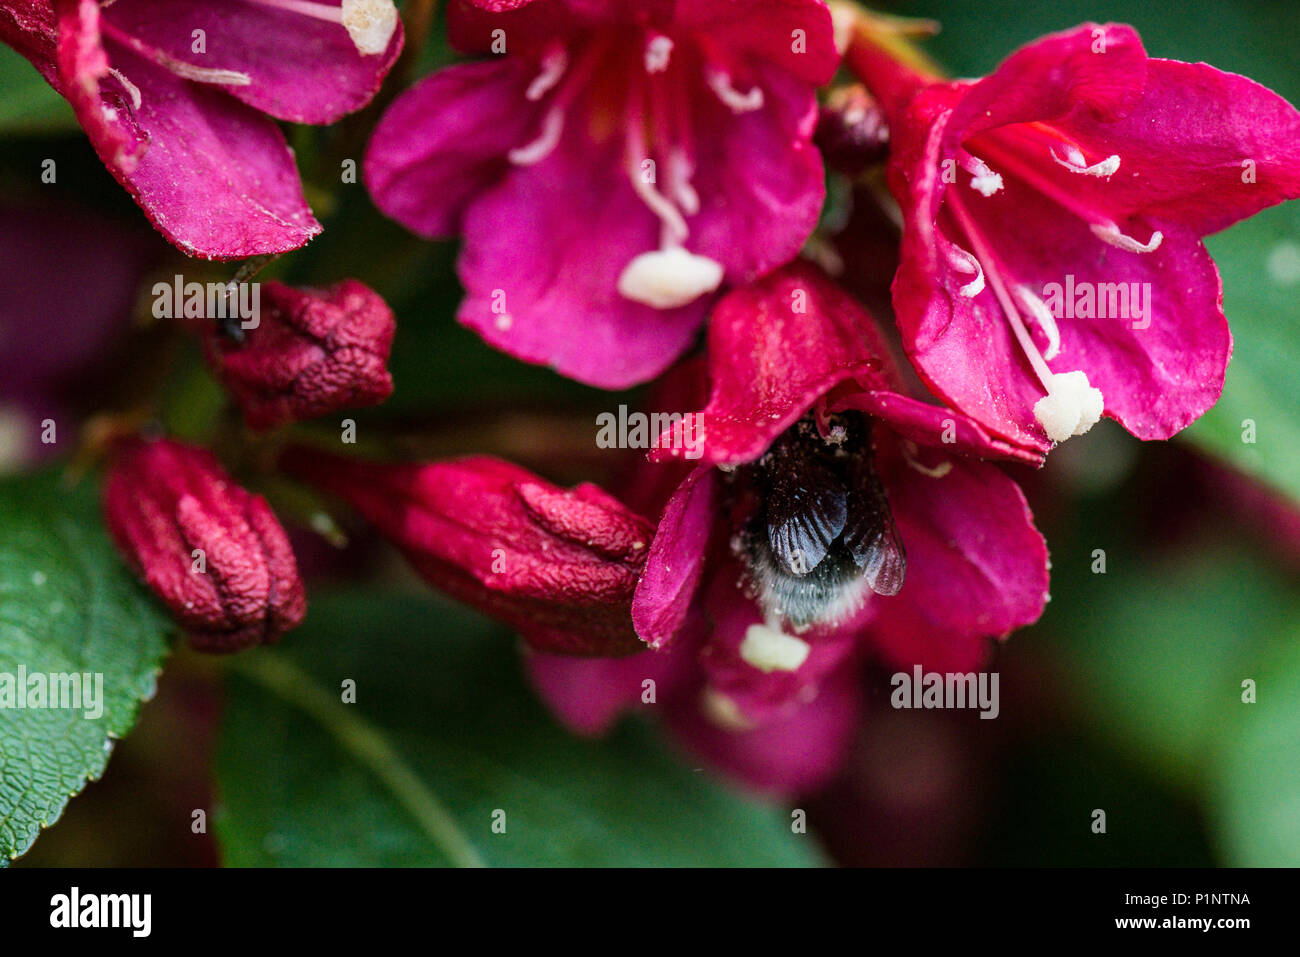 A bee on the flower of a Weigela 'Bristol Ruby' Stock Photo